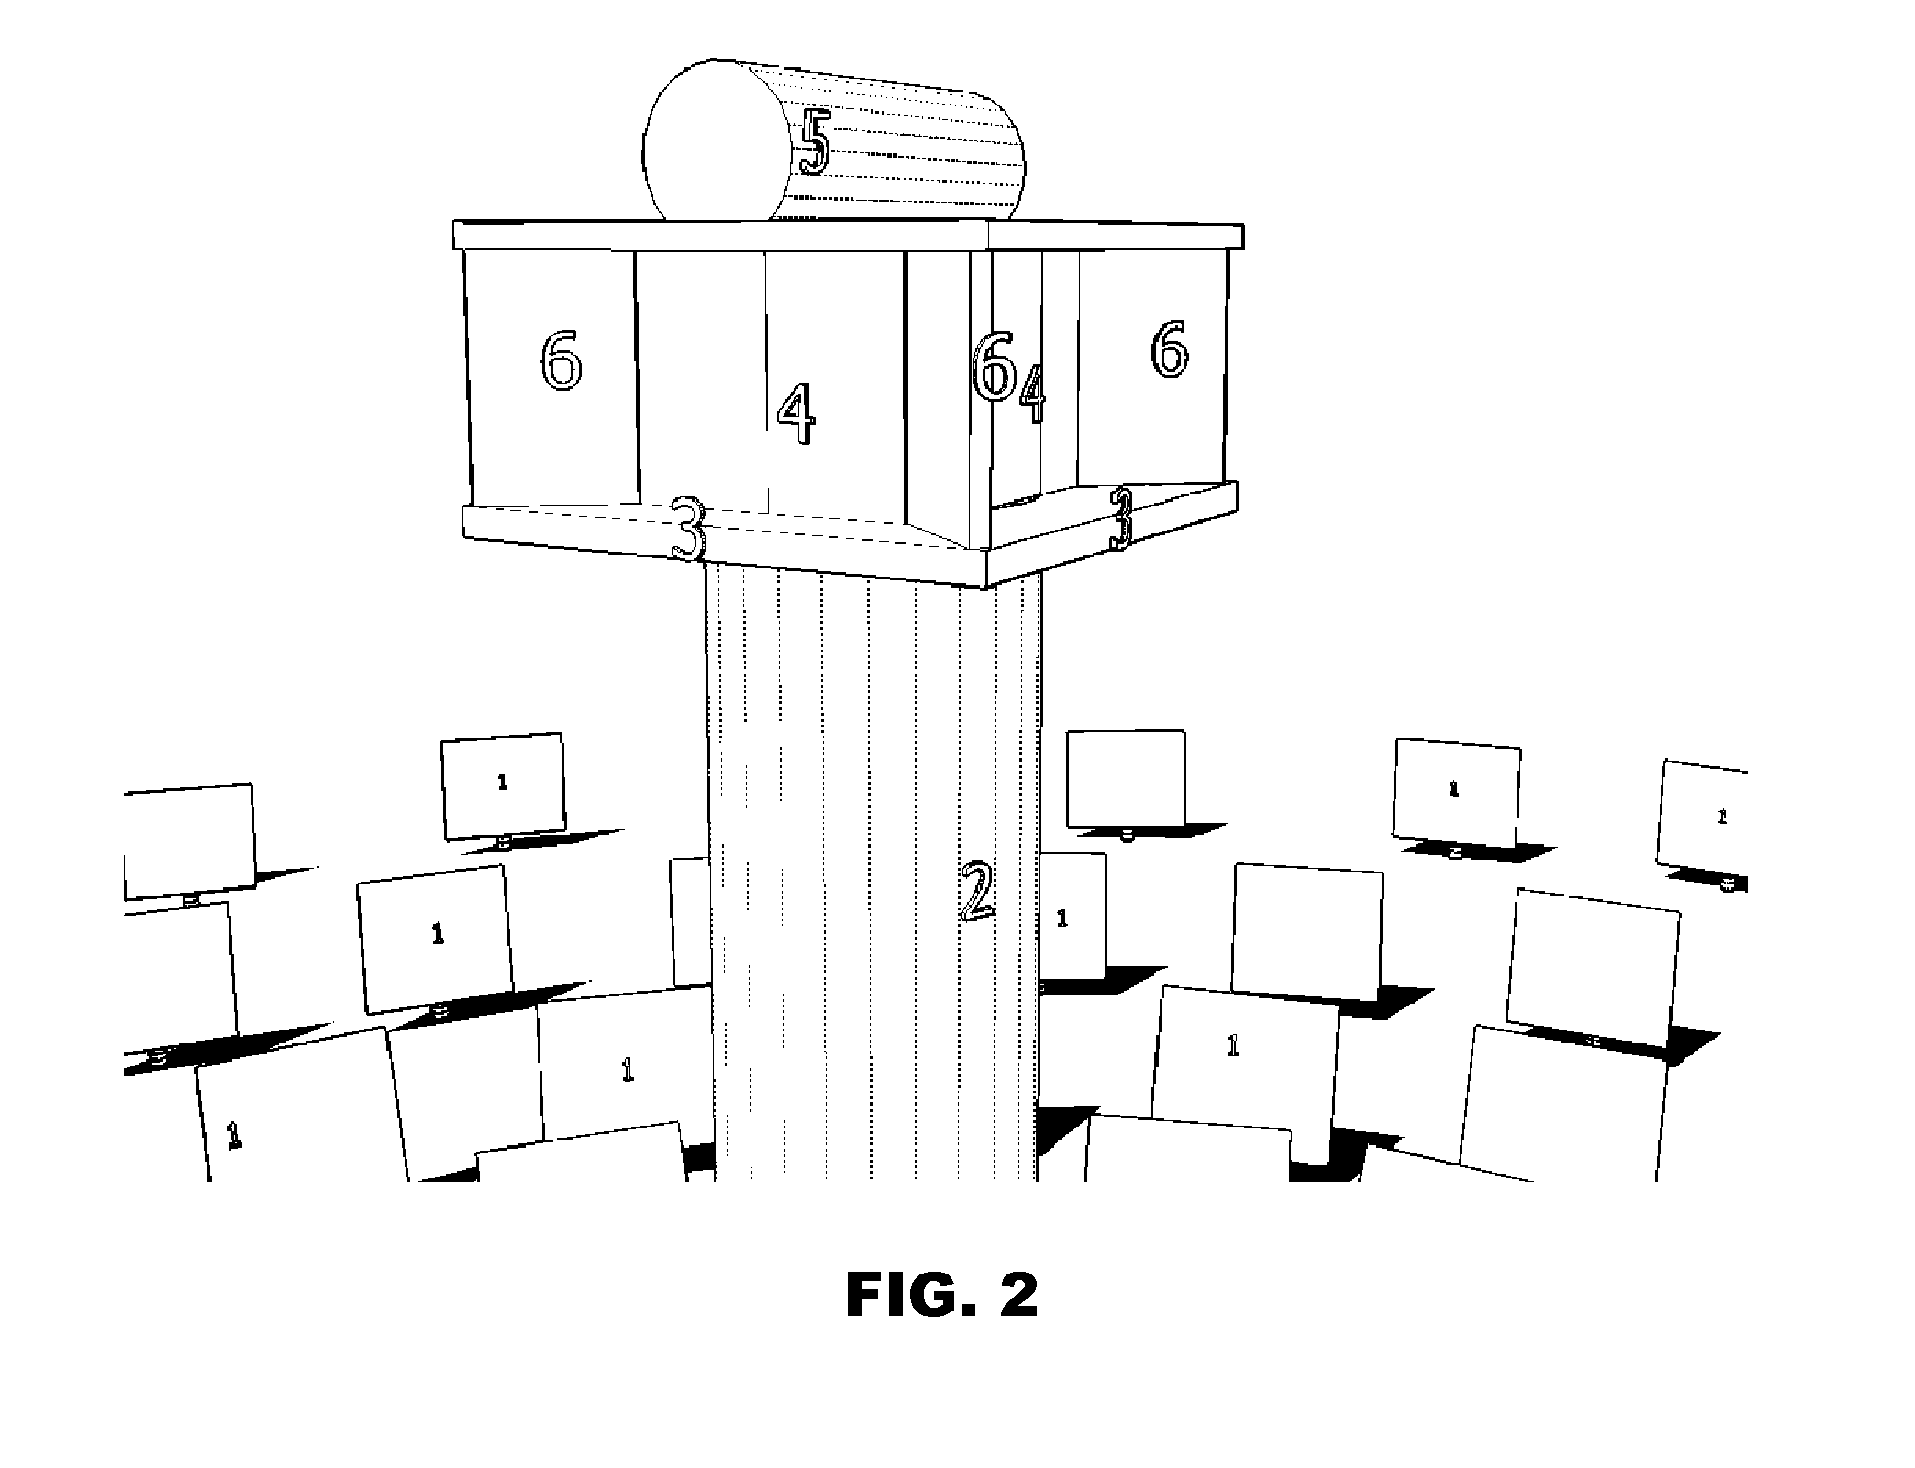 High-power tower receiver configuration